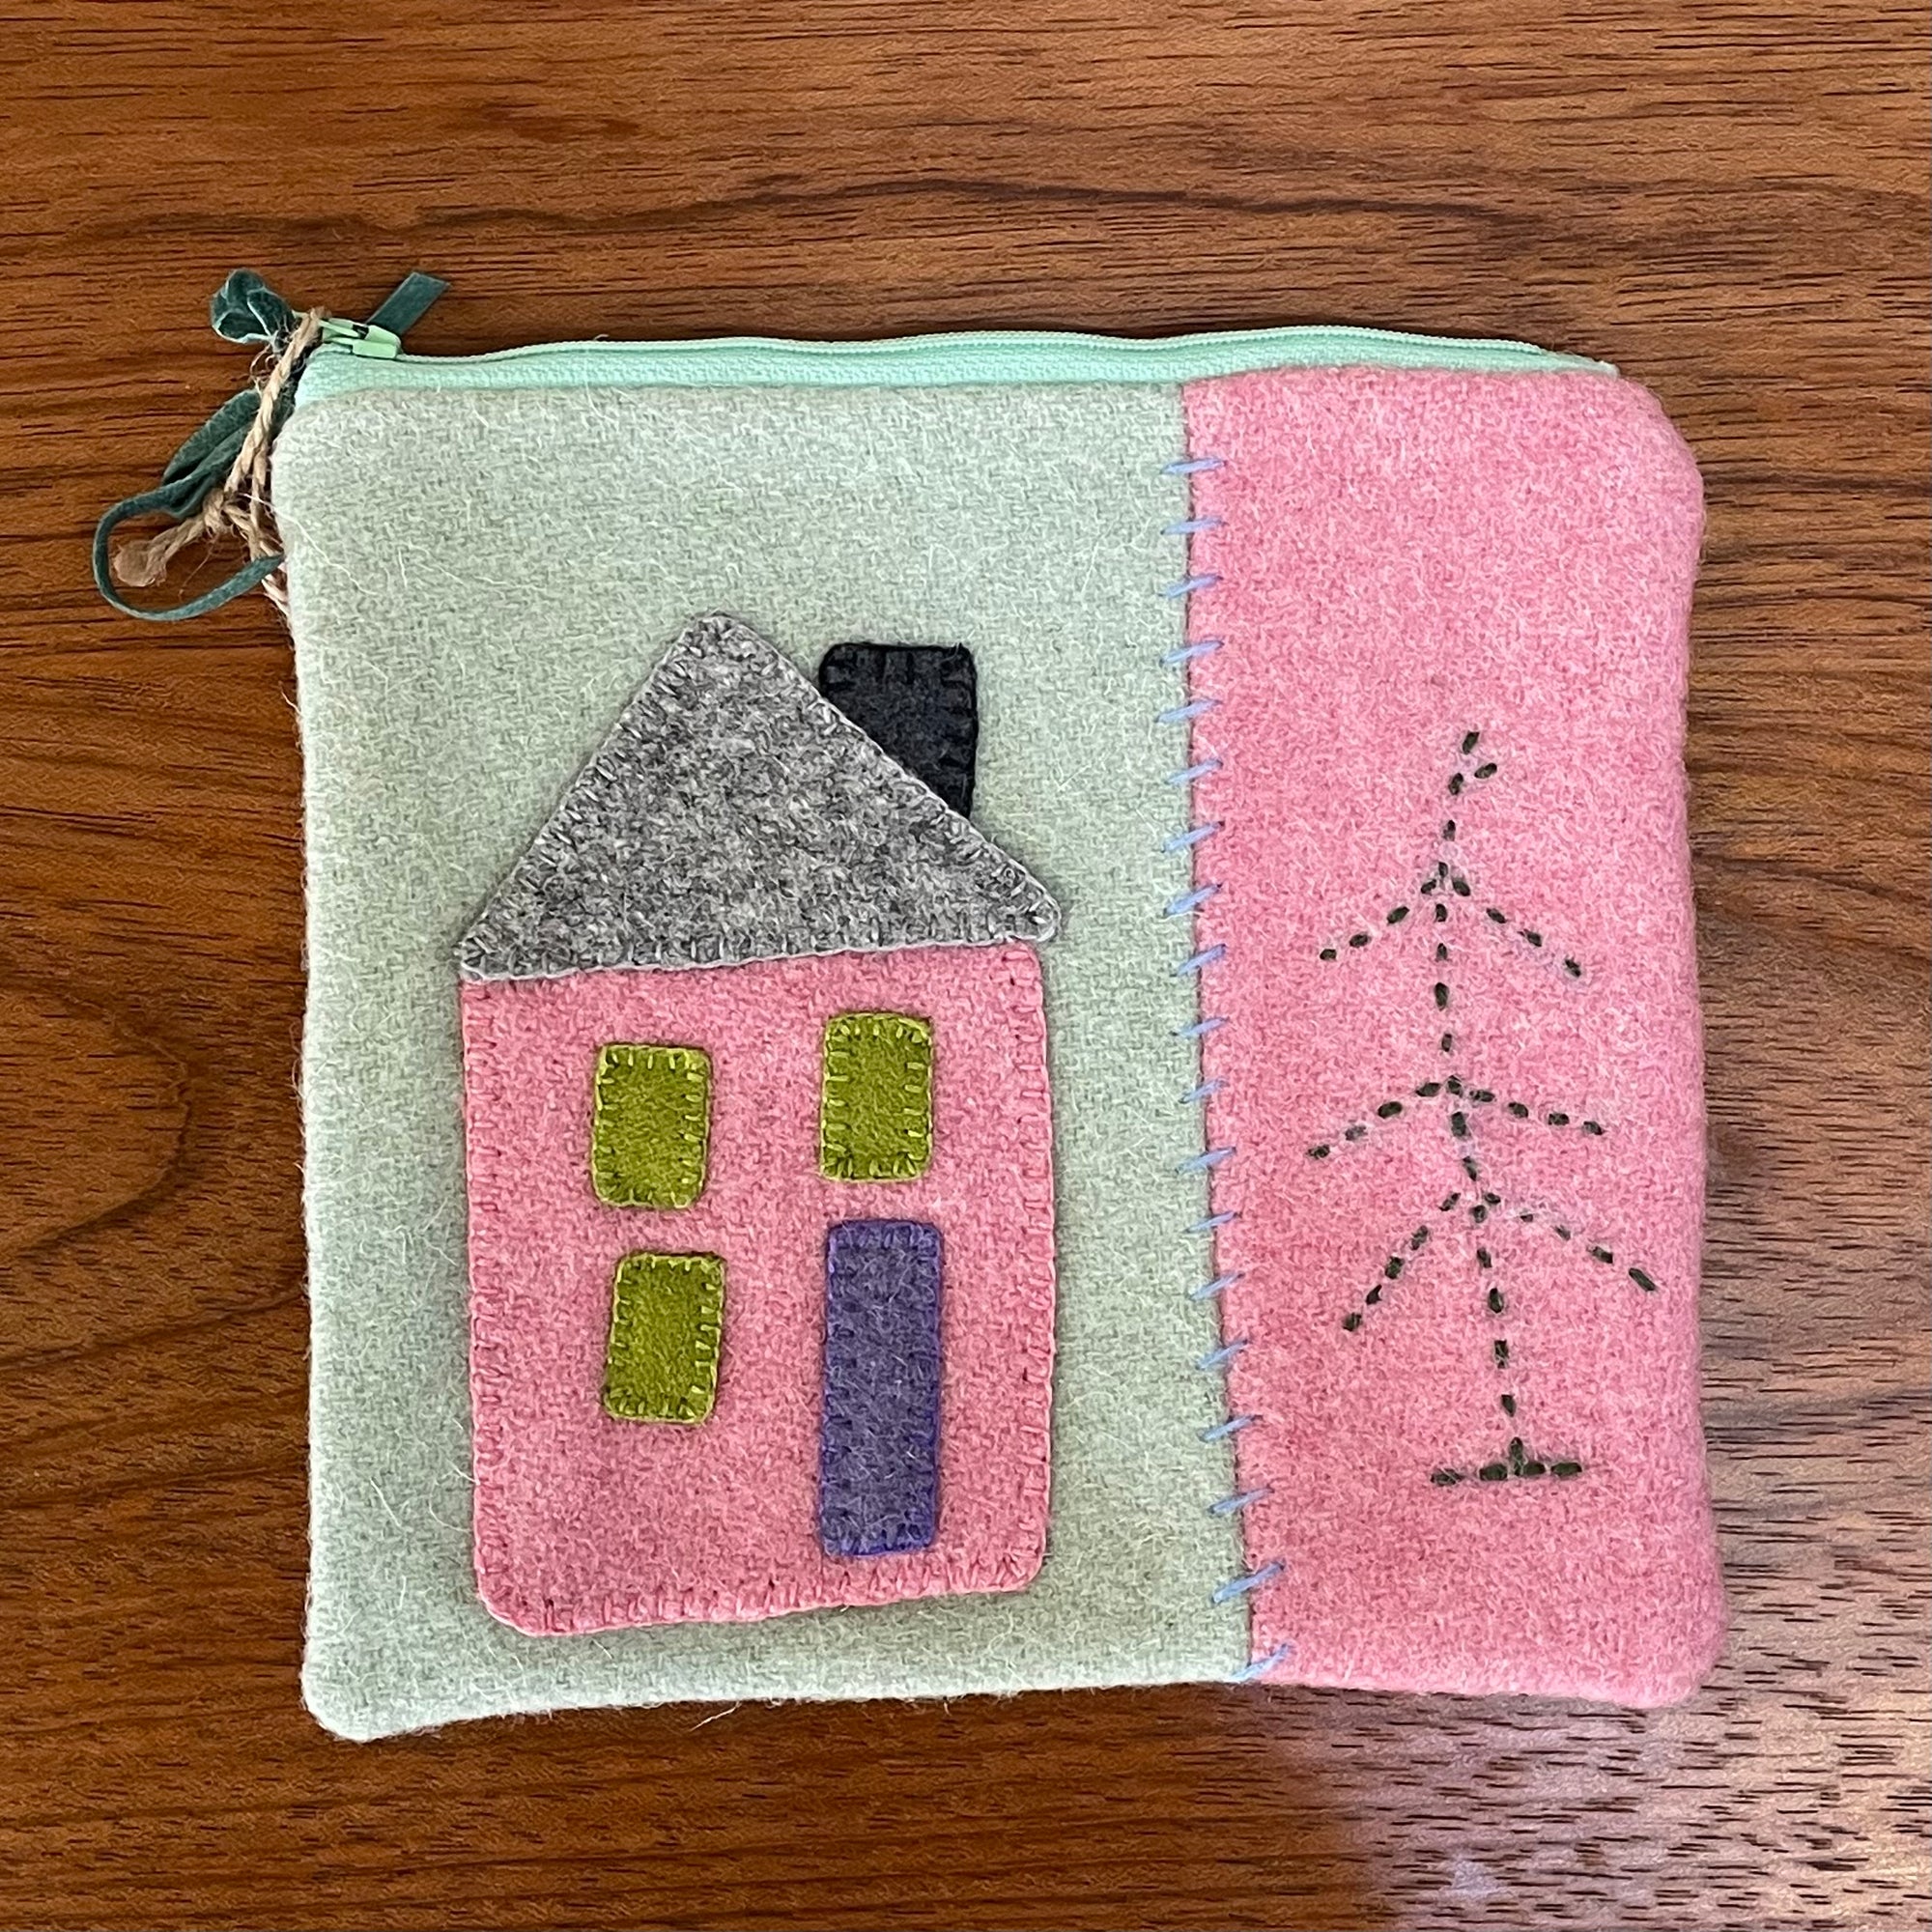 House Pouch